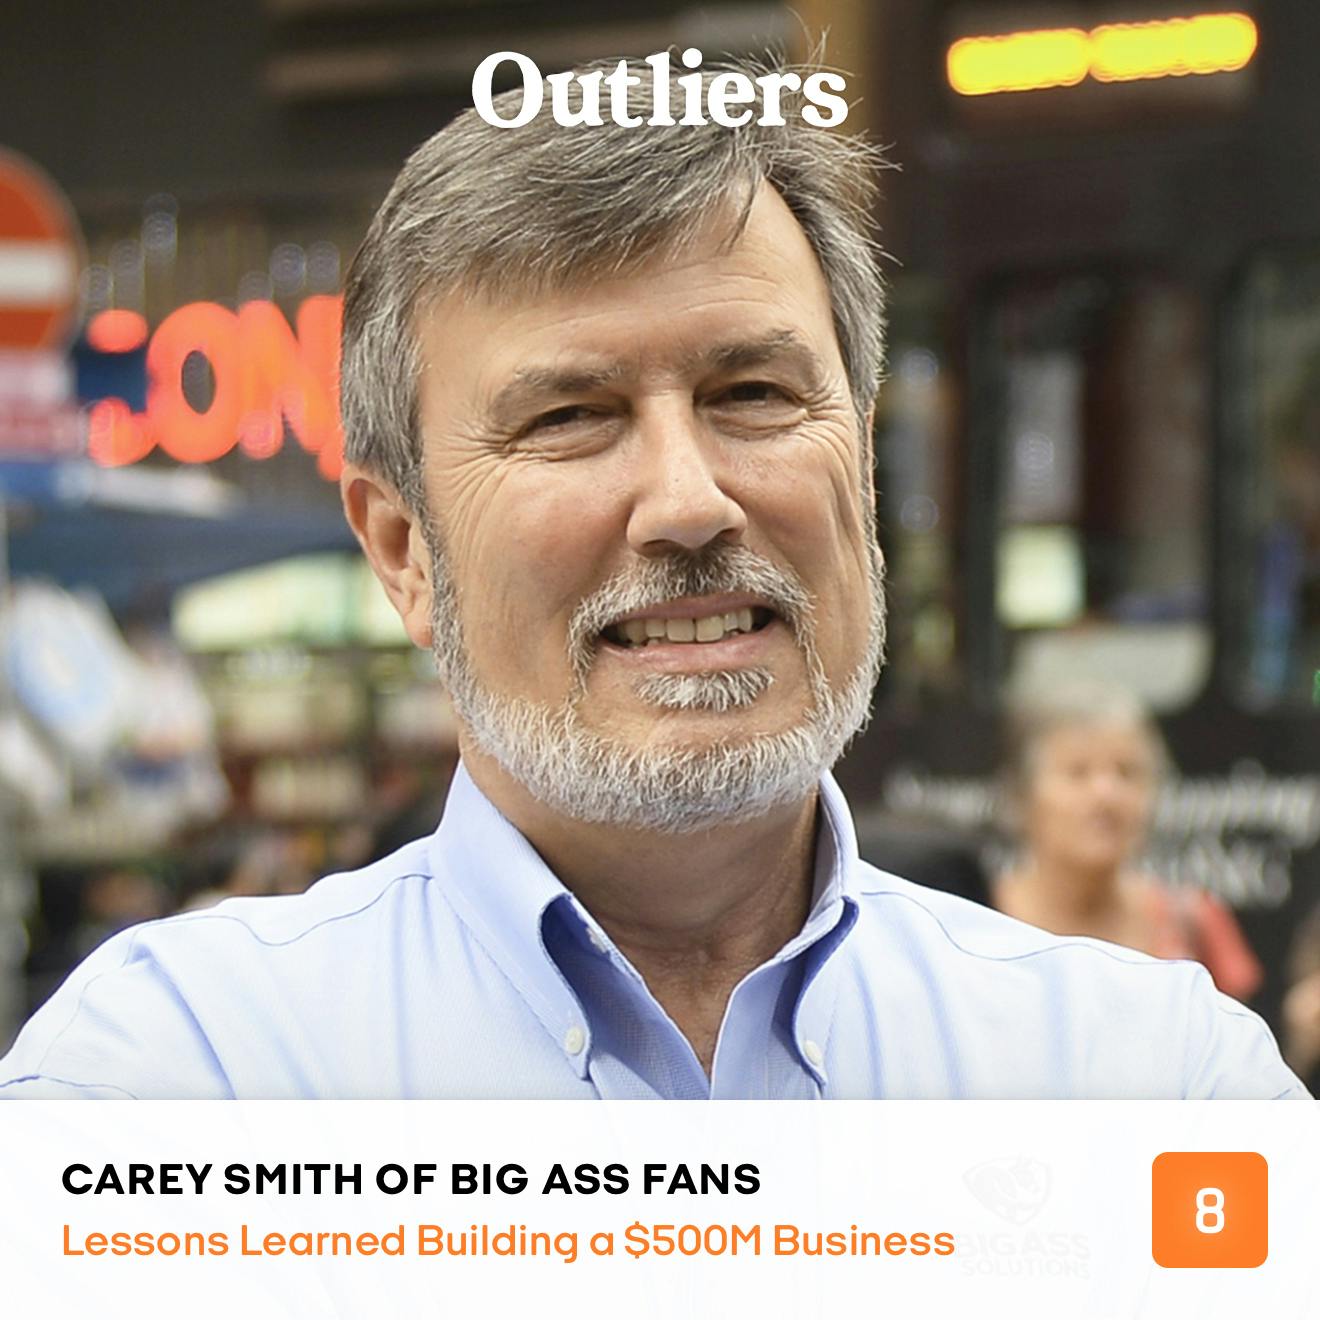 All-Time Top 10 Guests – #5 Carey Smith (Big Ass Fans: The World’s Least Sexy $500M Business)